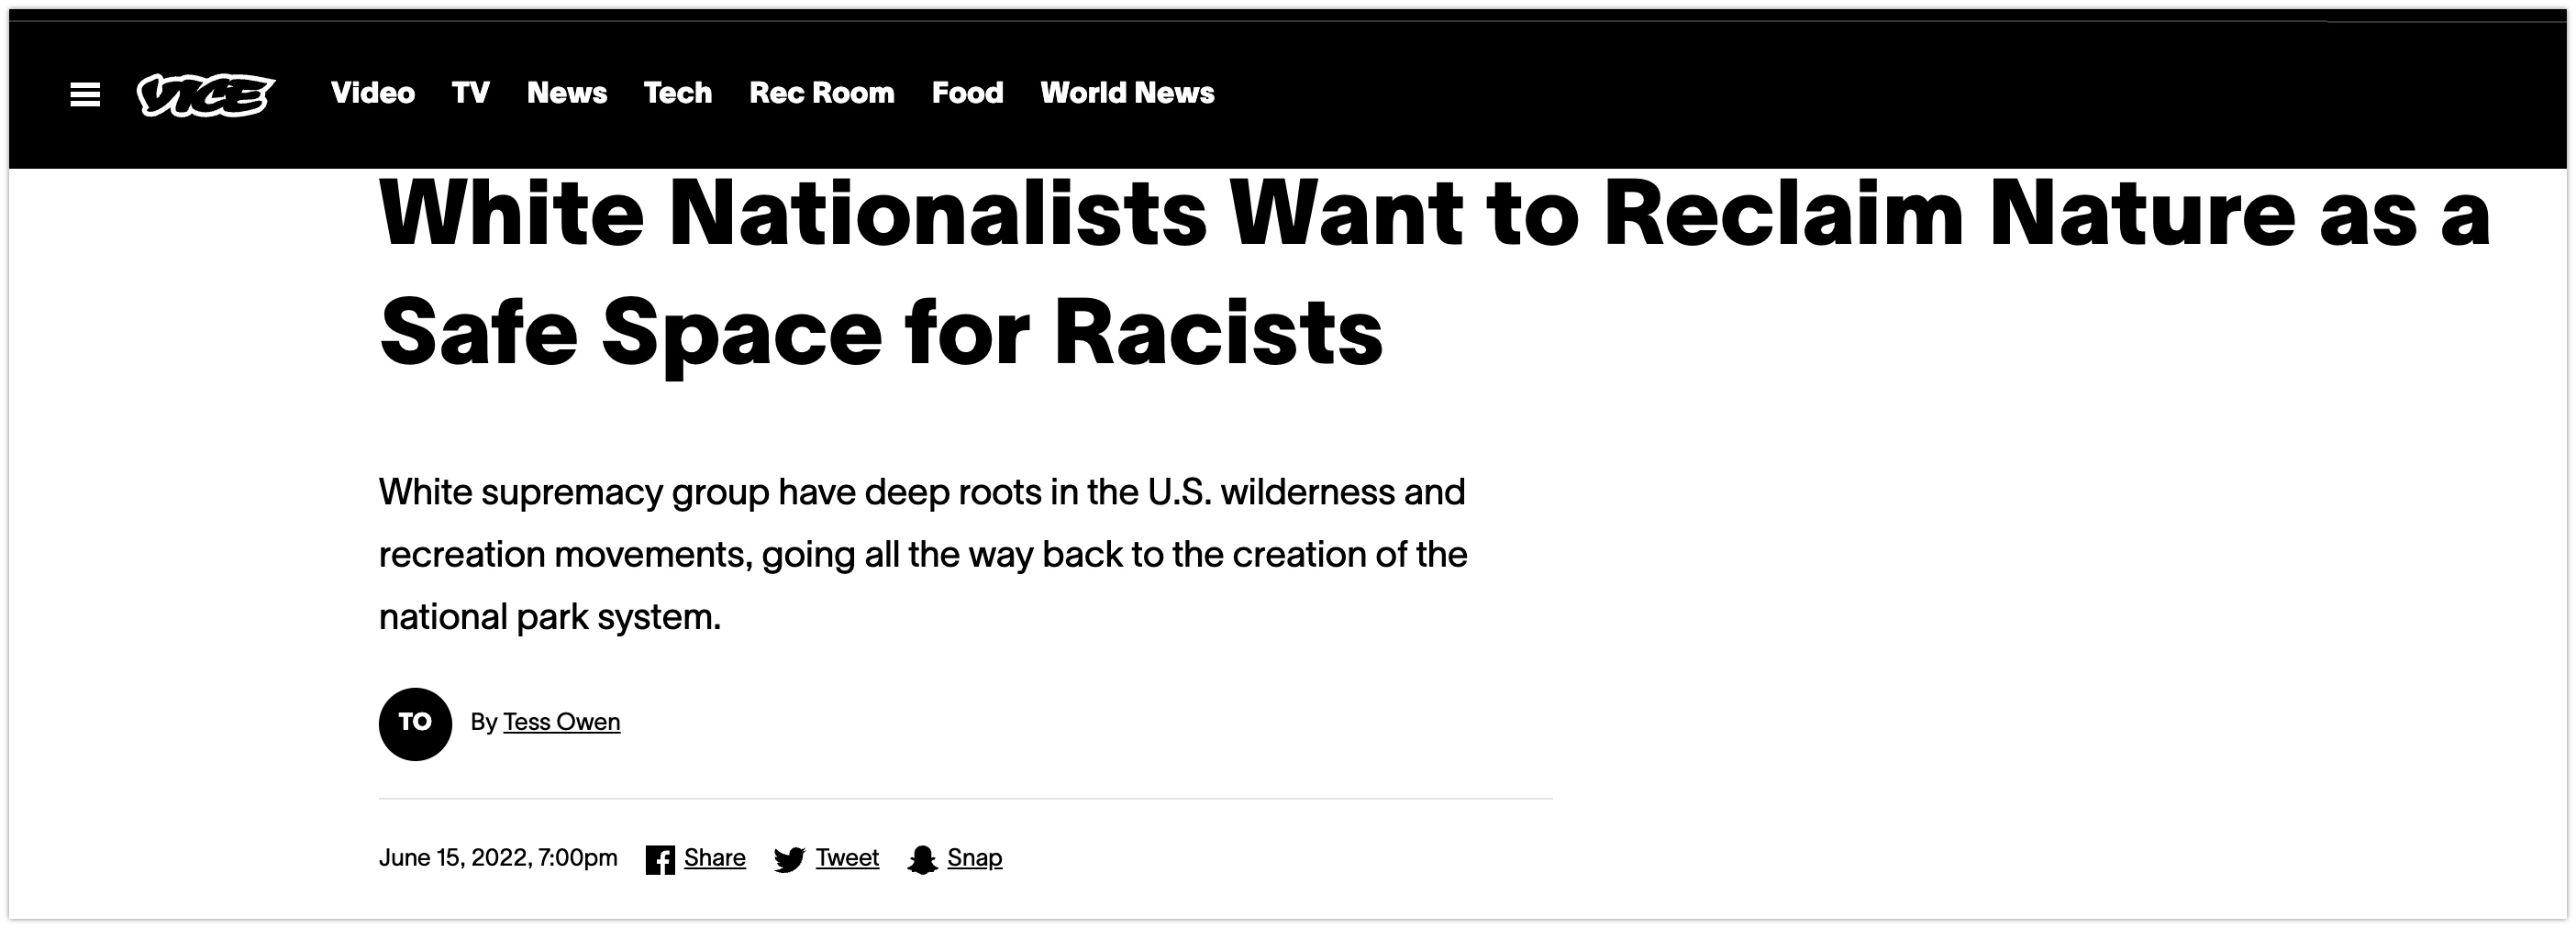 White Nationalists Reclaim Nature as a Safe Space for Racists.jpg